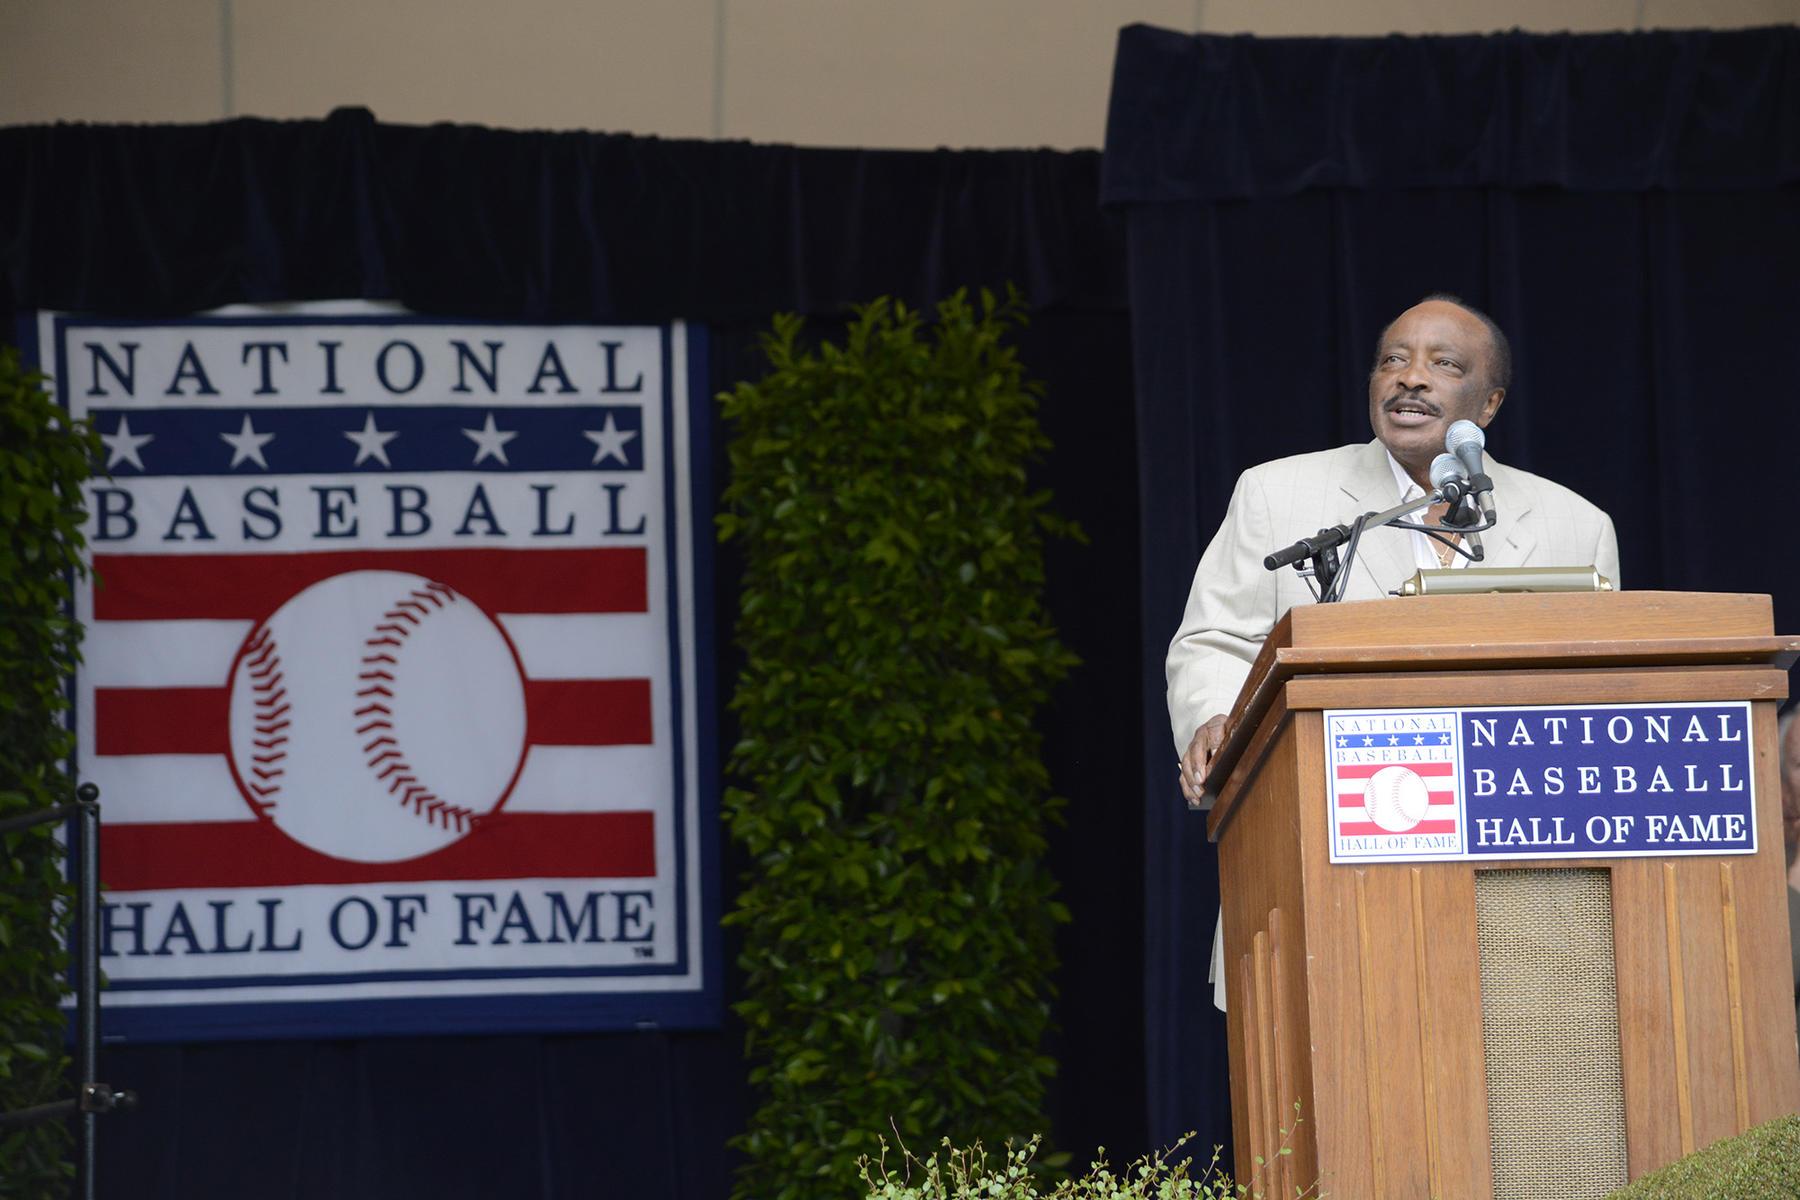 Joe Morgan remembered as winner on and off the field